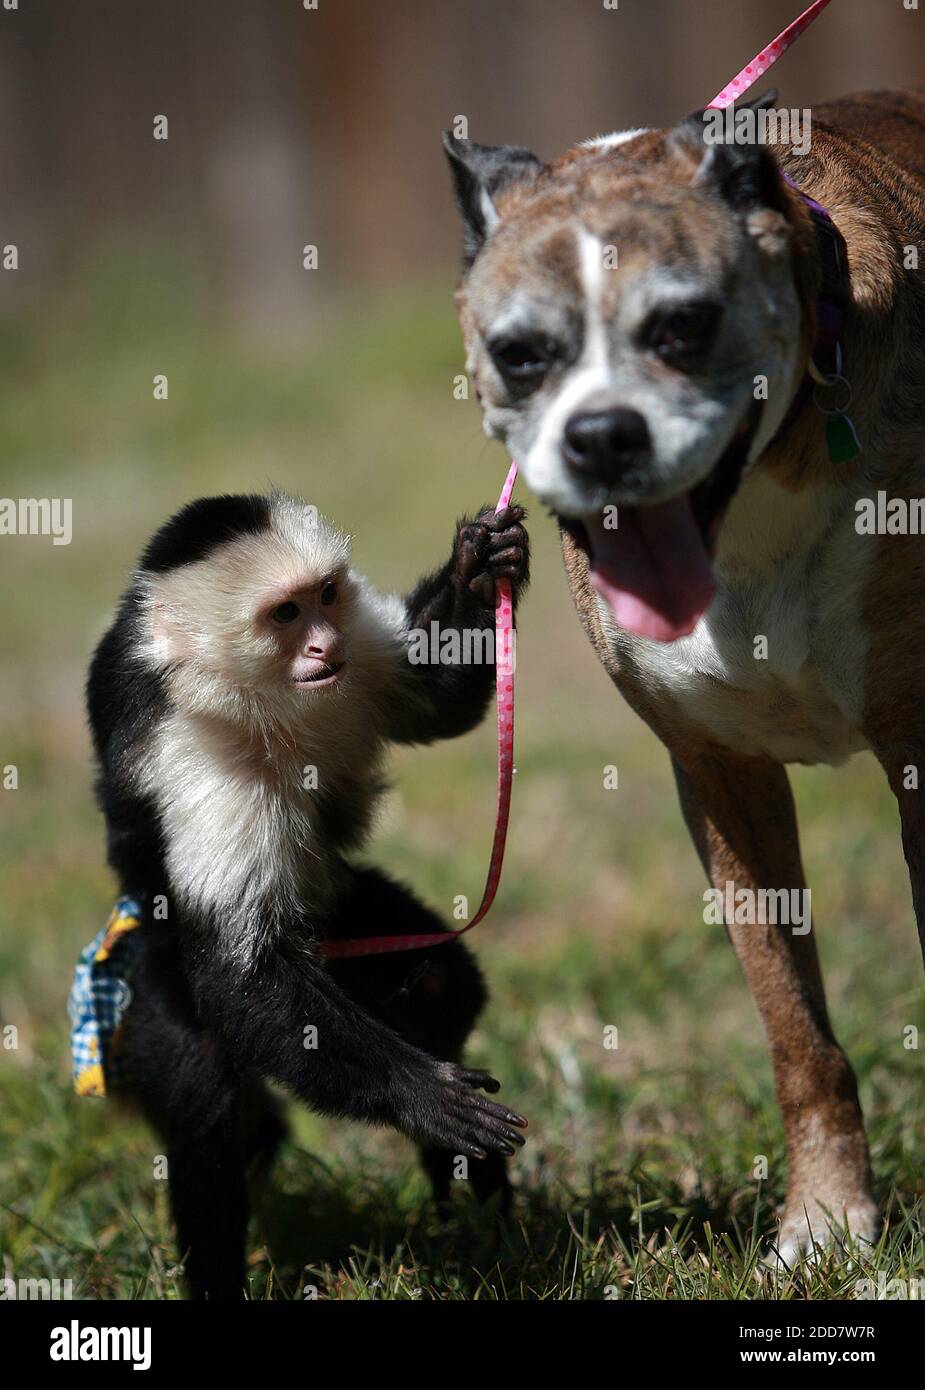 NO FILM, NO VIDEO, NO TV, NO DOCUMENTARY - Jessica Marie, a capuchin monkey, leads Sadie the family's pet boxer around the yard in Deltona, Friday, March, 28, 2008. Lori Johnson has spent the last 18 years fawning over her pet monkey like it were her baby in Deltona, FL, USA on April 13, 2008. Photo by Roberto Gonzalez/Orlando Sentinel/MCT/ABACAPRESS.COM Stock Photo